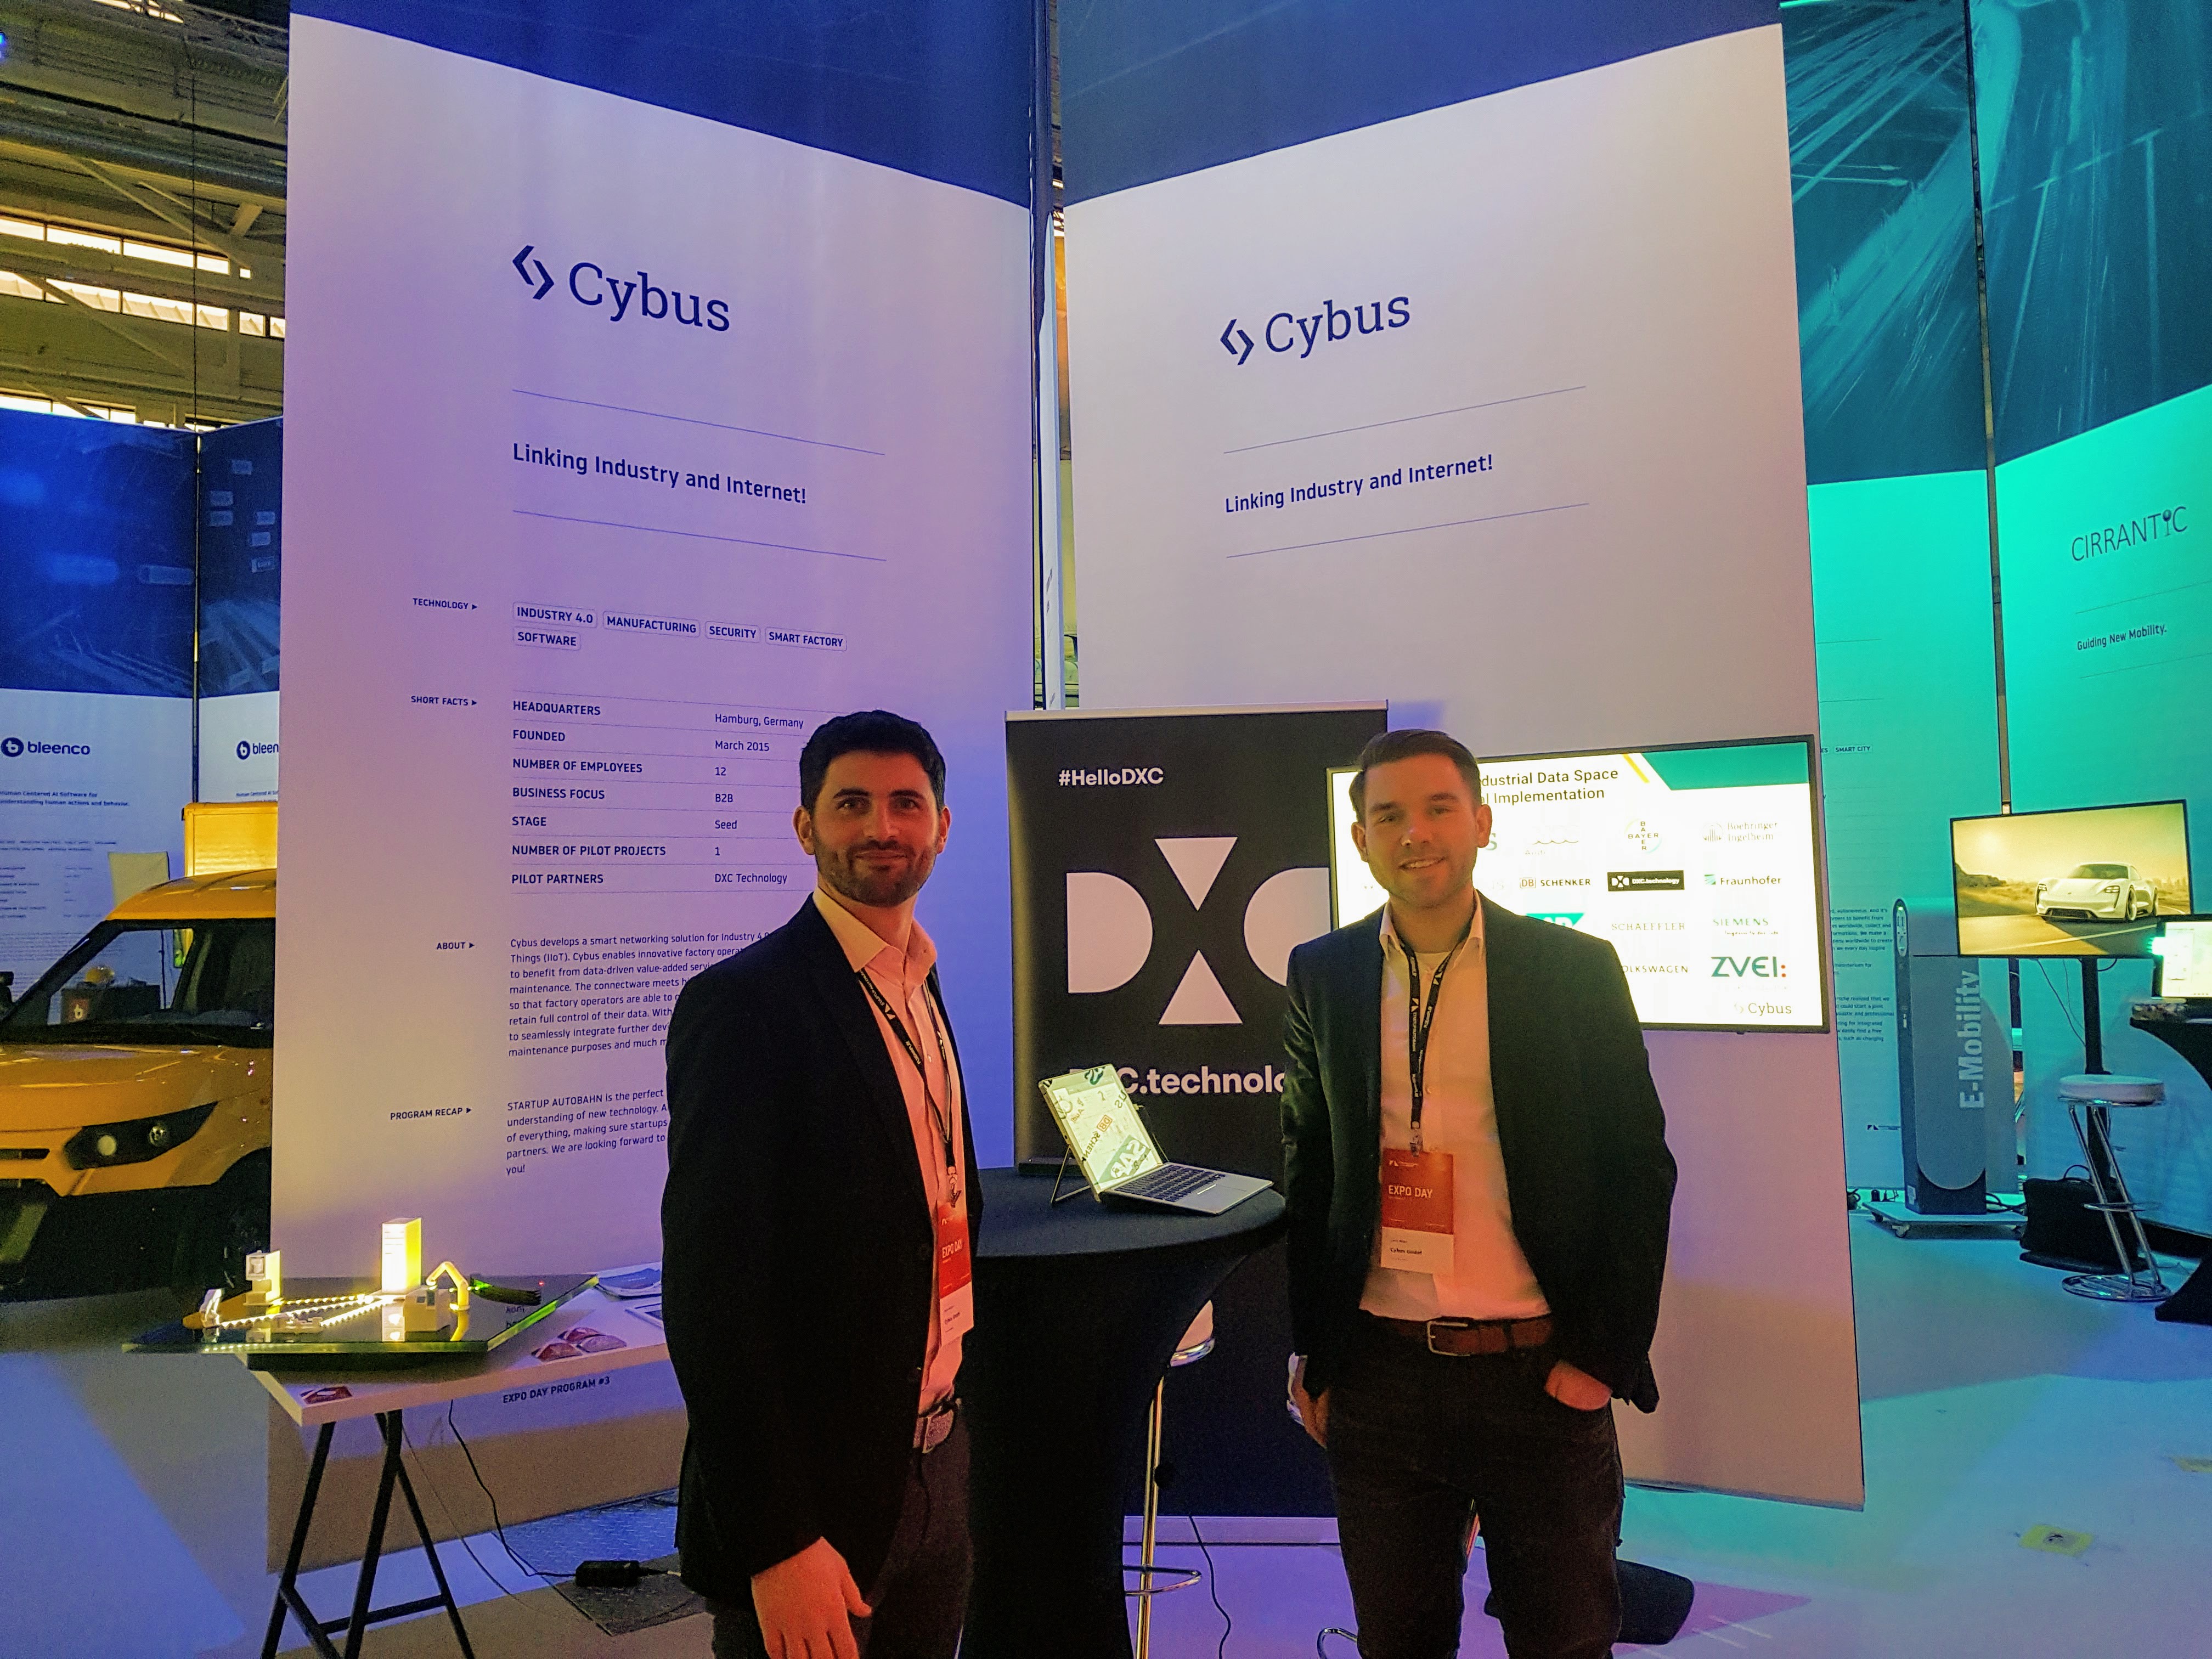 Cybus at the Expo Day of the Startup Autobahn